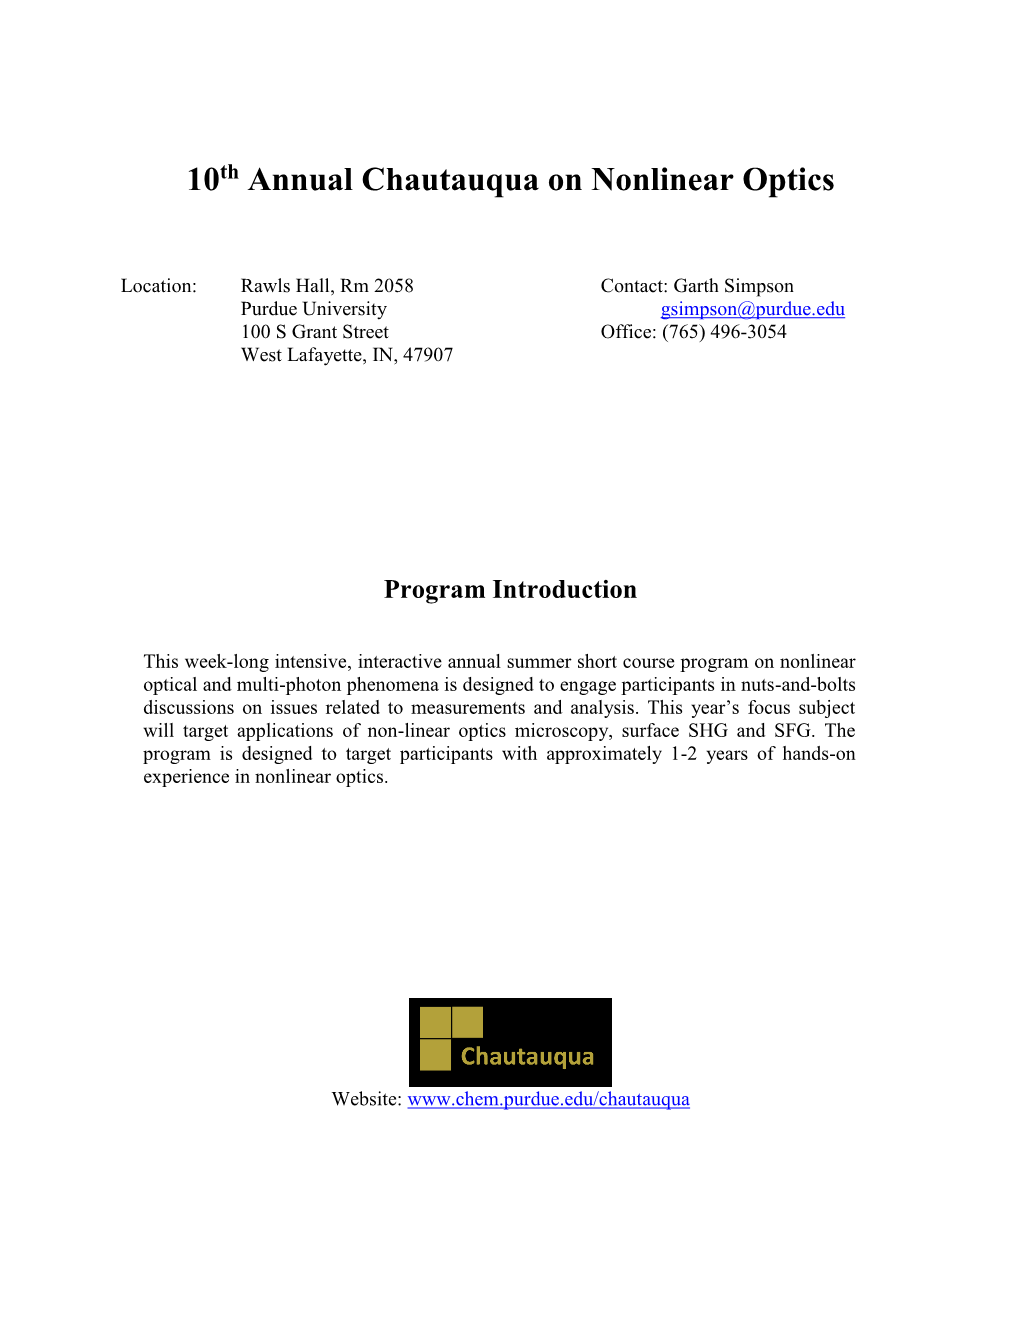 First Annual Midwest Chautauqua on Polarization Effects in Nonlinear